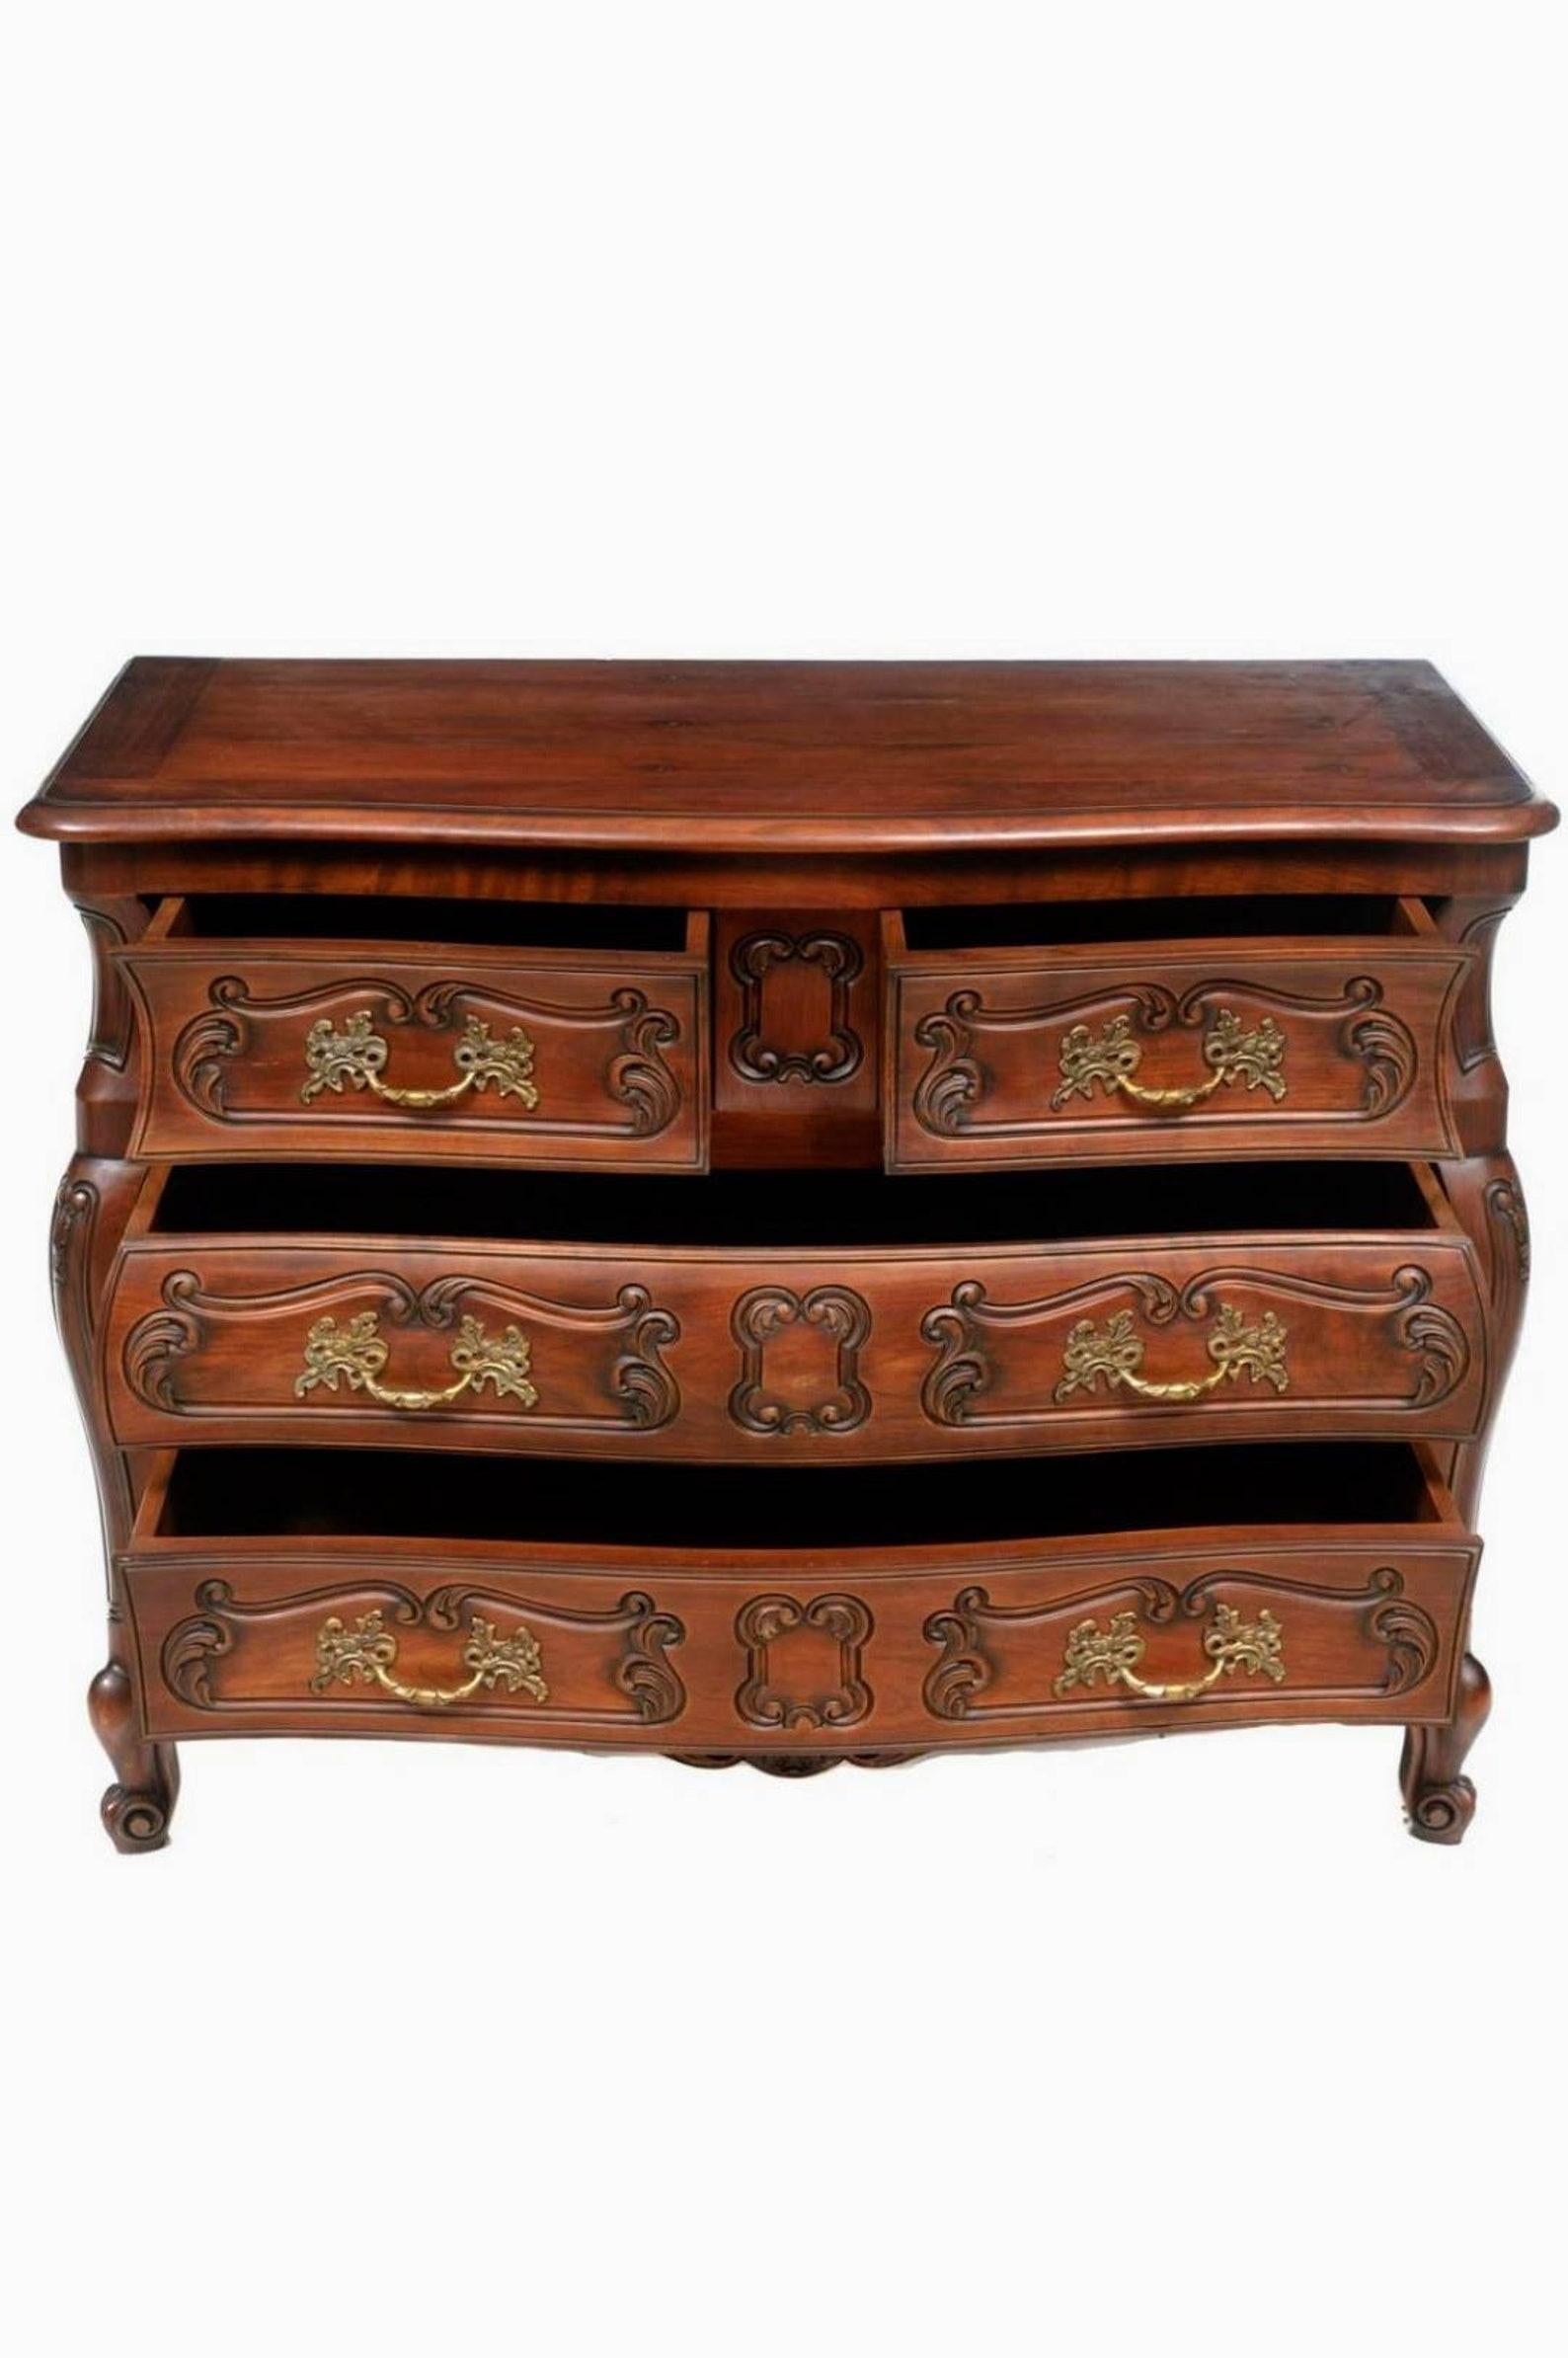 Antique French Provincial Louis XV Style Bombe Chest of Drawers In Good Condition For Sale In Forney, TX